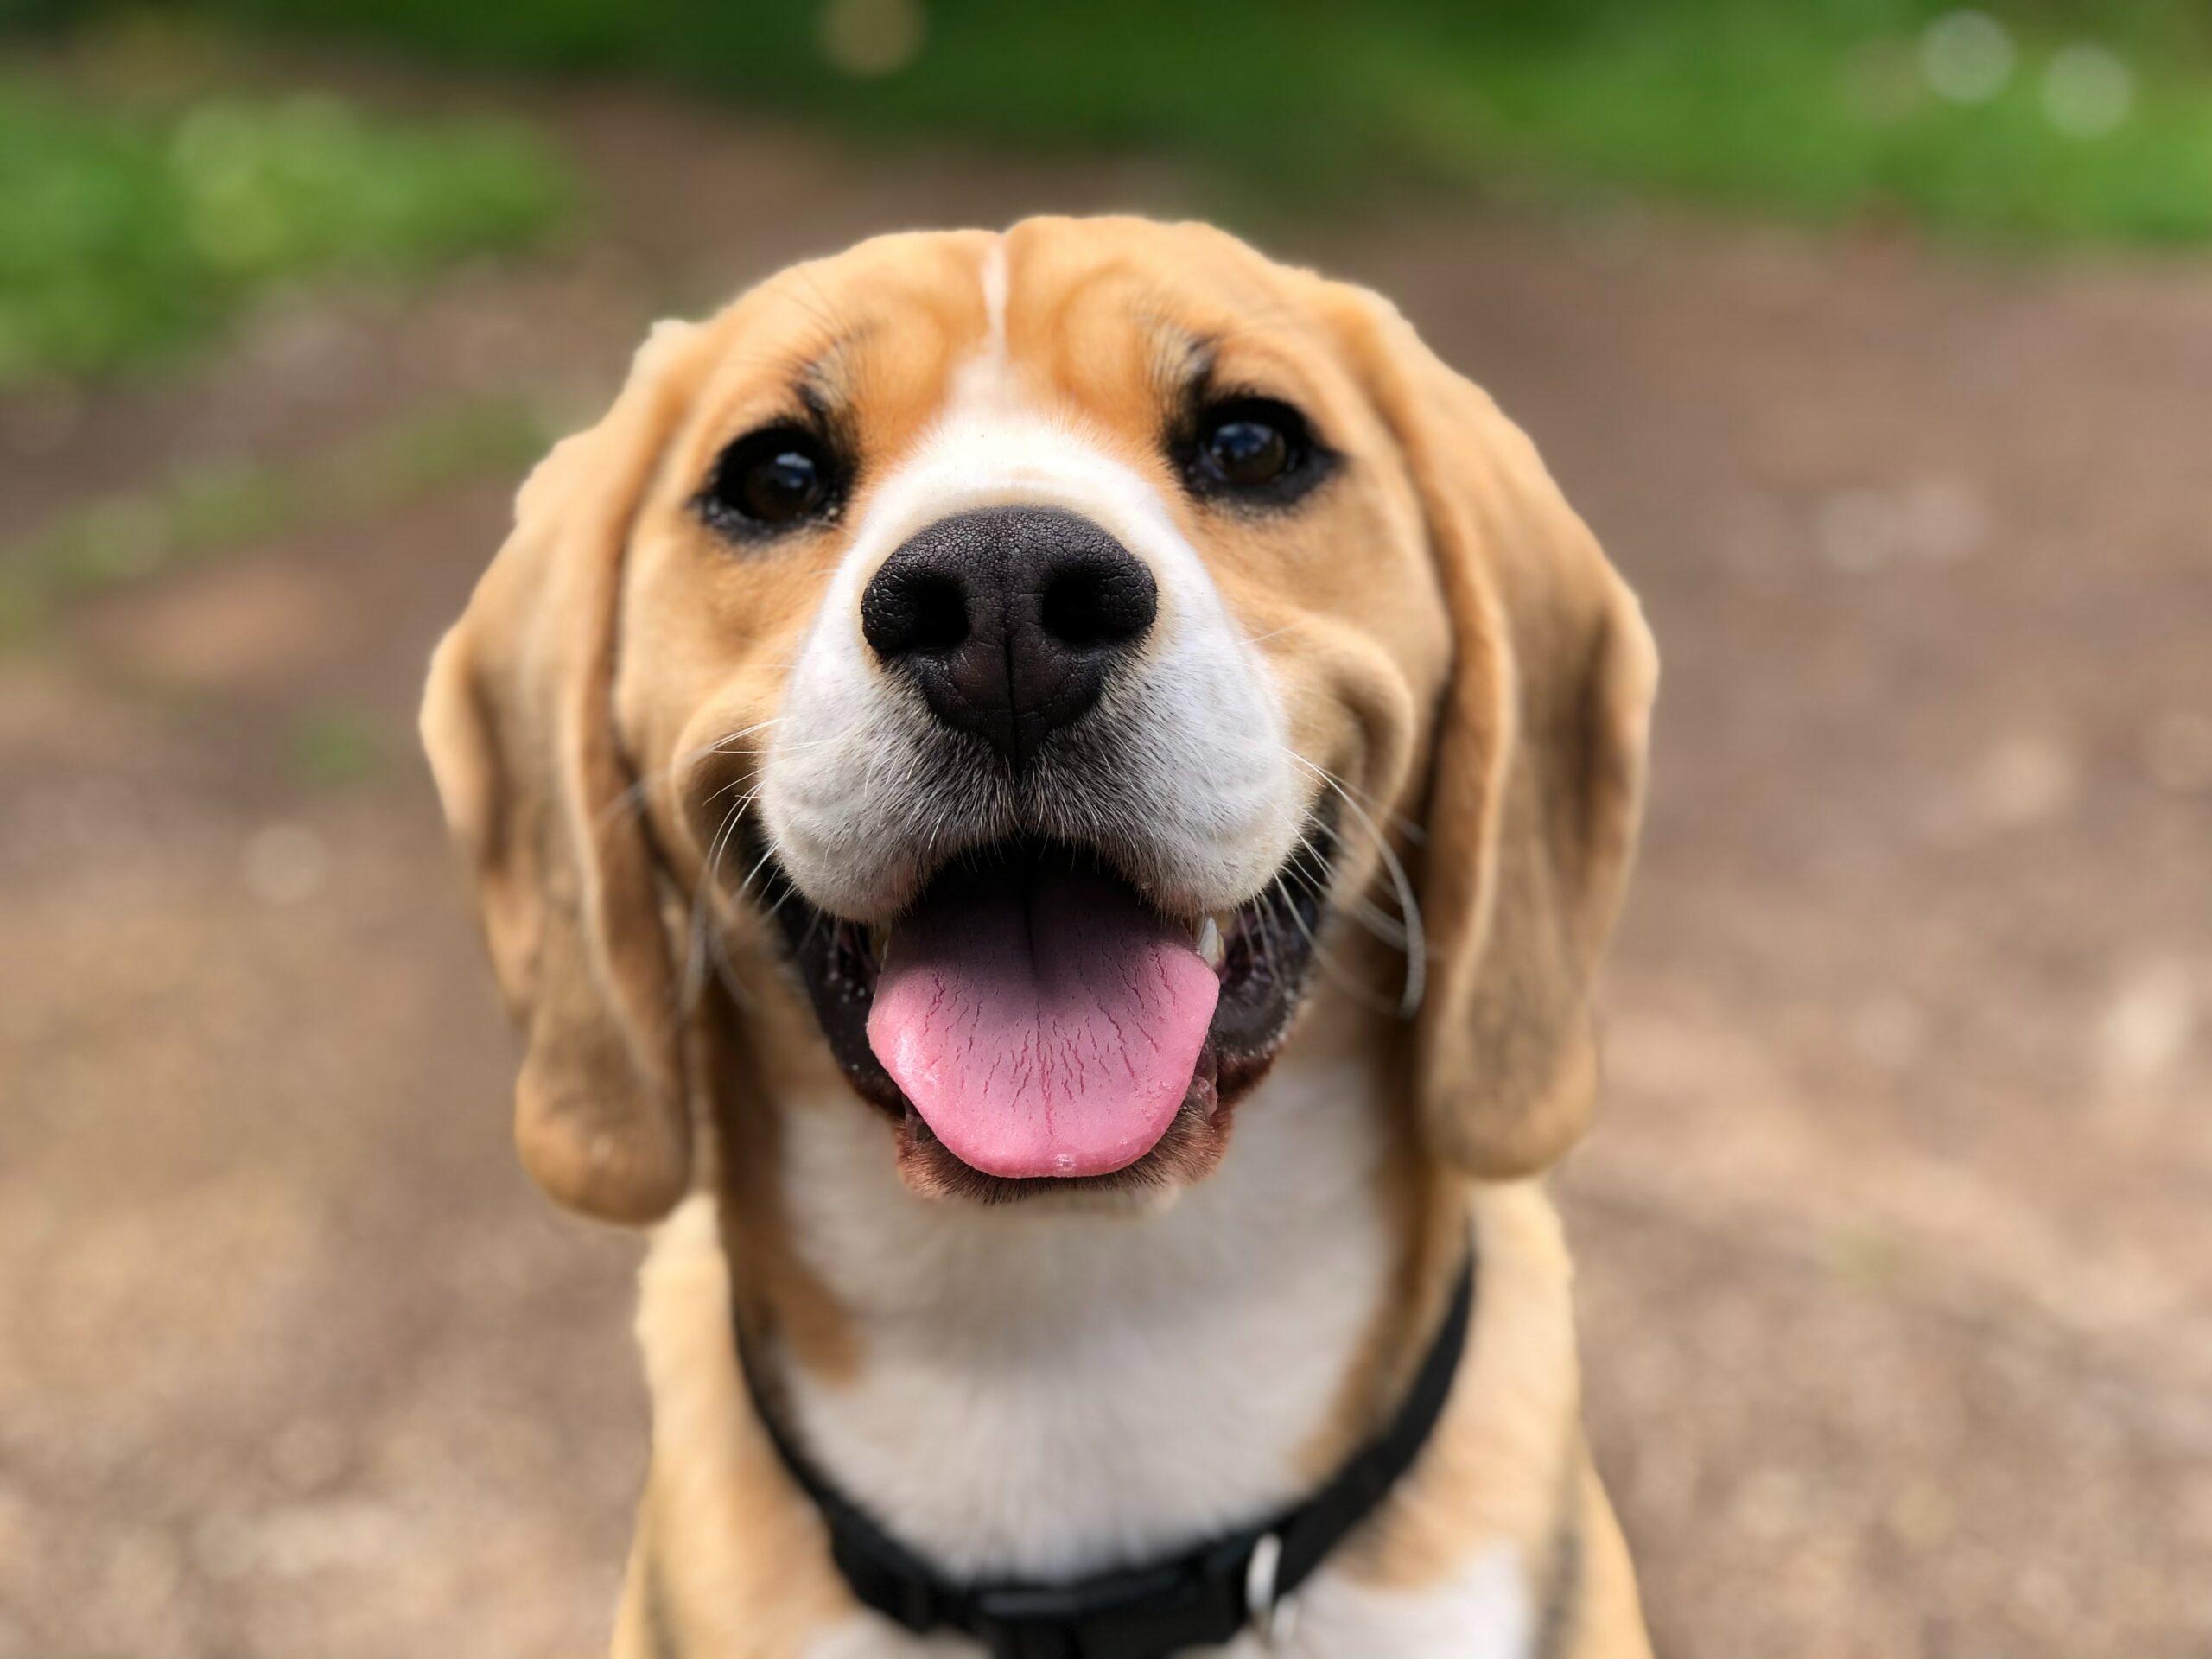 How An API Can Get You Accurate Dog Breed Information